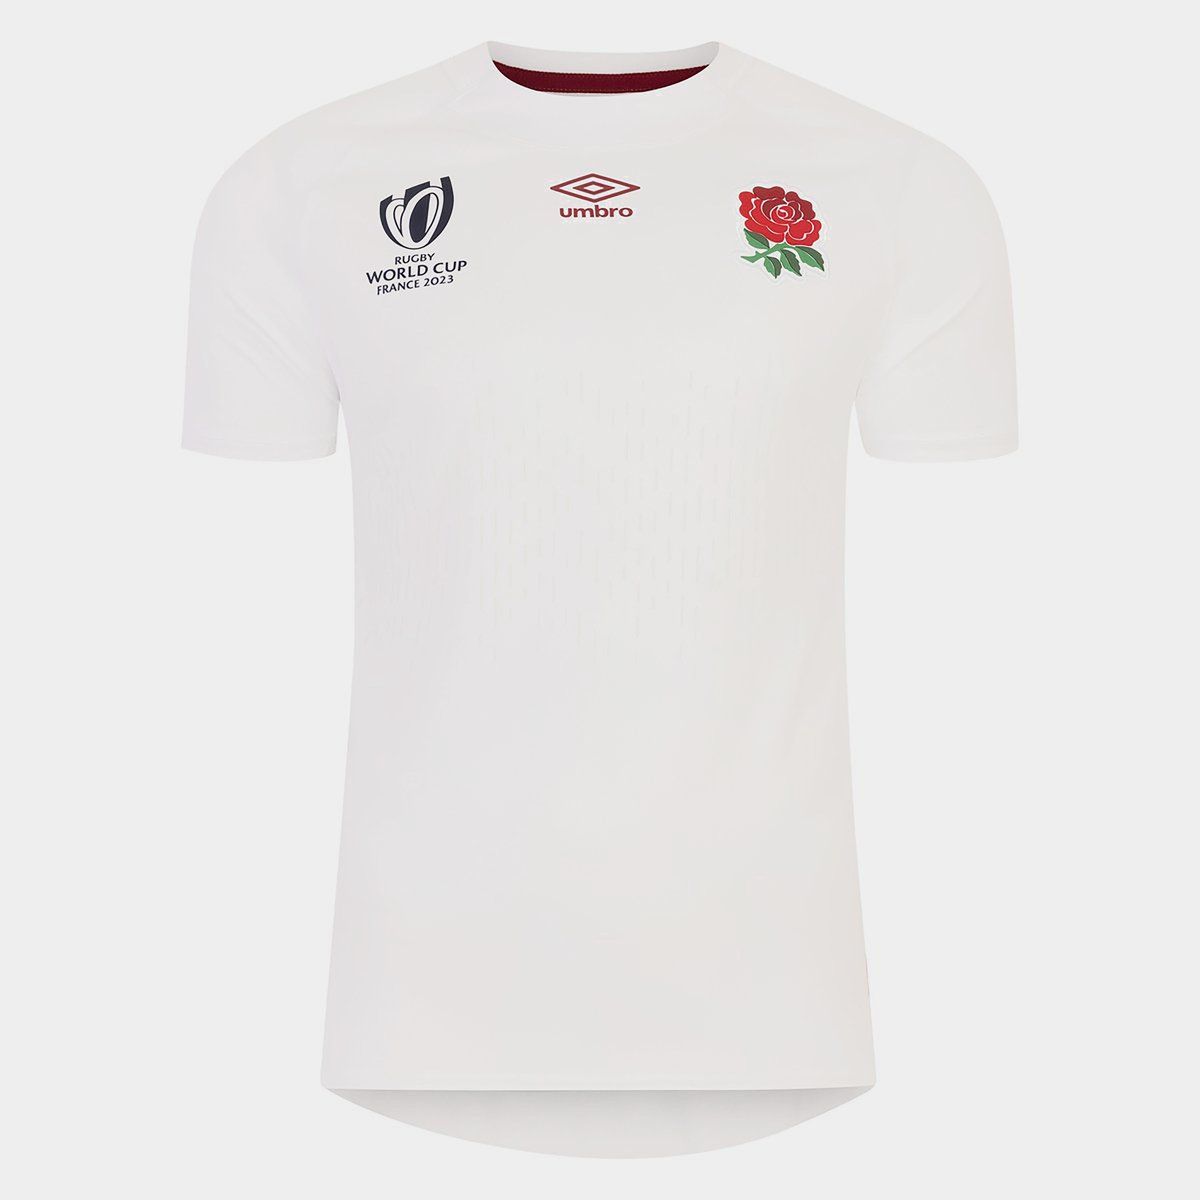 england rugby shop online